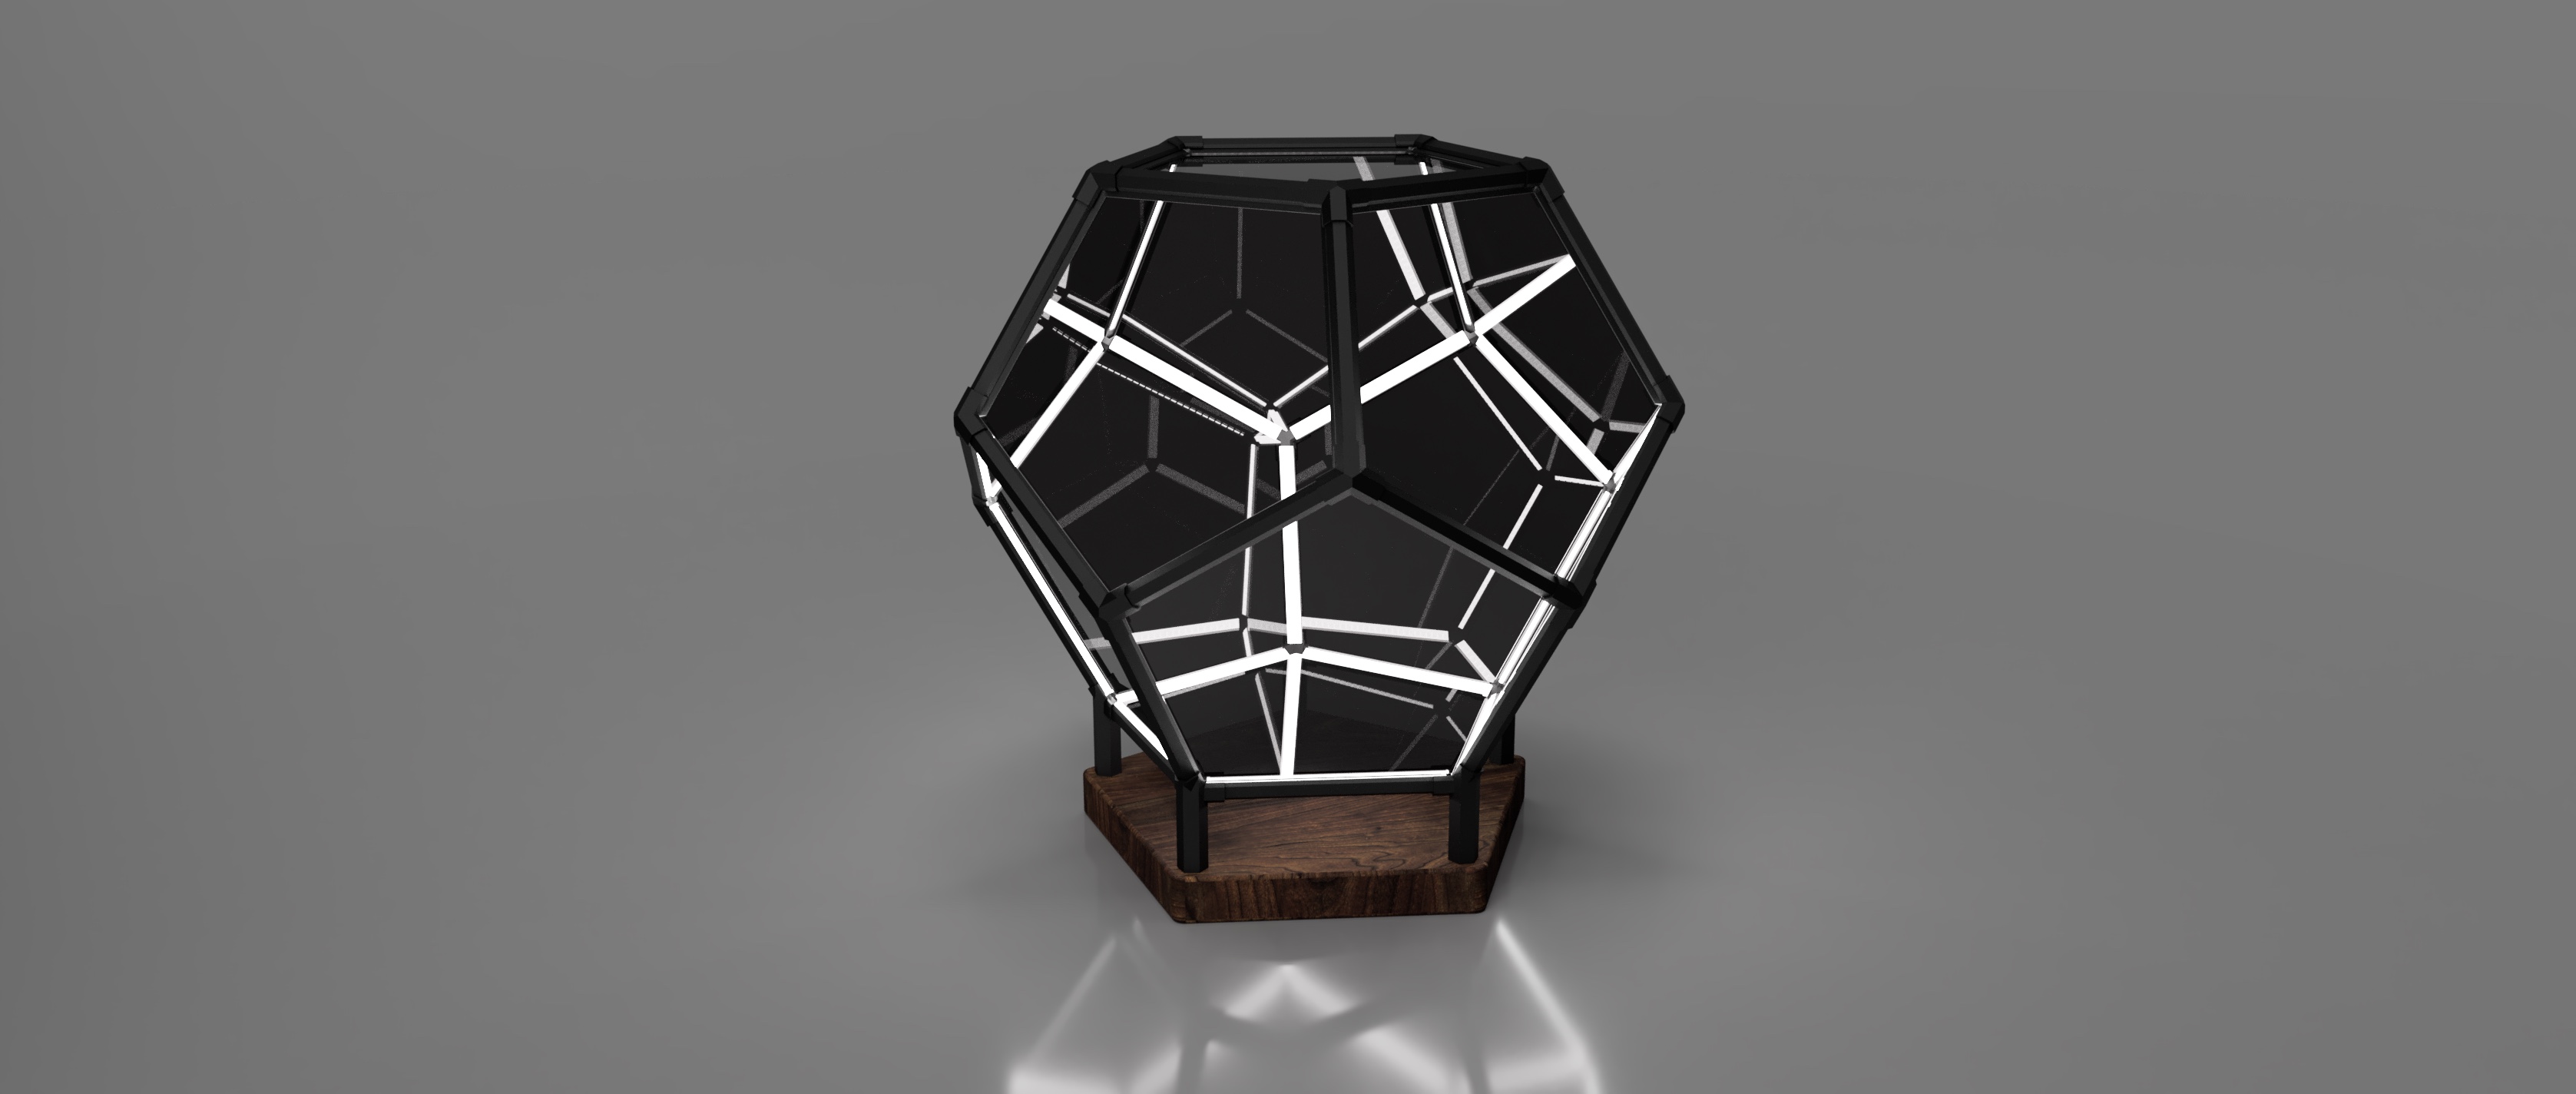 Infinity Dodecahedron - in about a week by @squigglelabs | Wikifactory